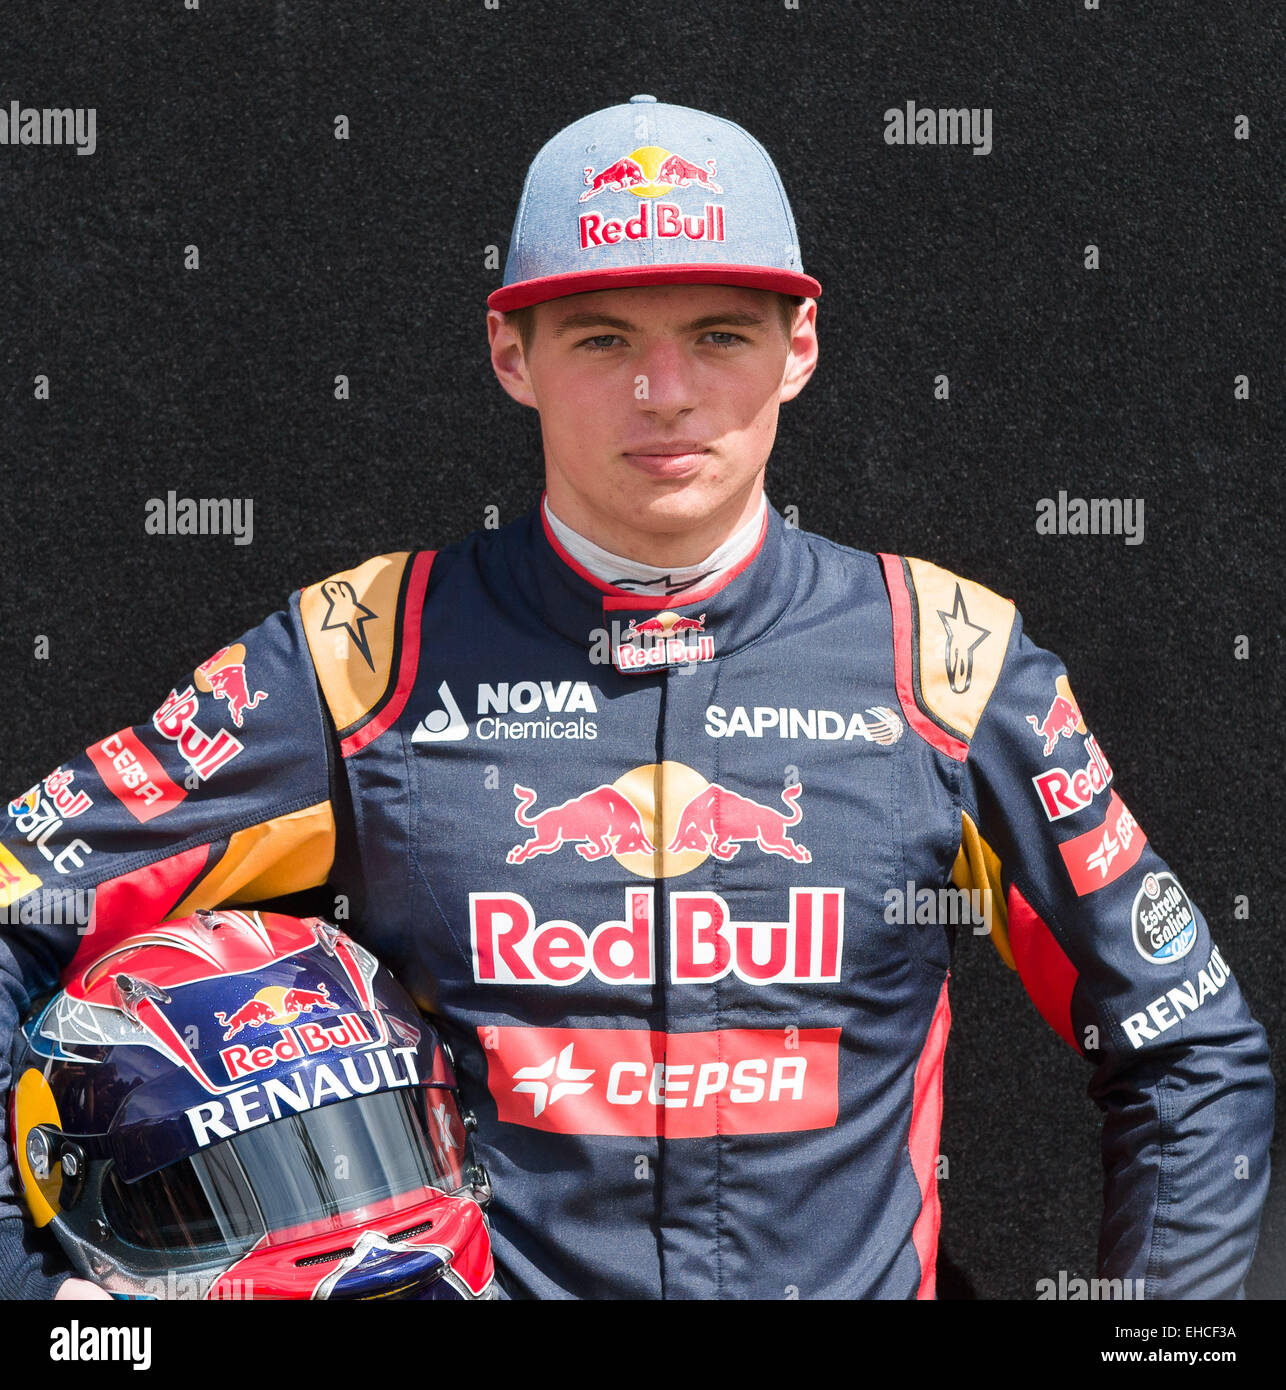 Albert Park, Melbourne, Australia. 12th Mar, 2015. Max Verstappen (NDL) #33 from the Scuderia Toro Rosso team pose at the drivers' photograph session at the 2015 Australian Formula One Grand Prix at Albert Park, Melbourne, Australia. Sydney Low/Cal Sport Media/Alamy Live News Stock Photo